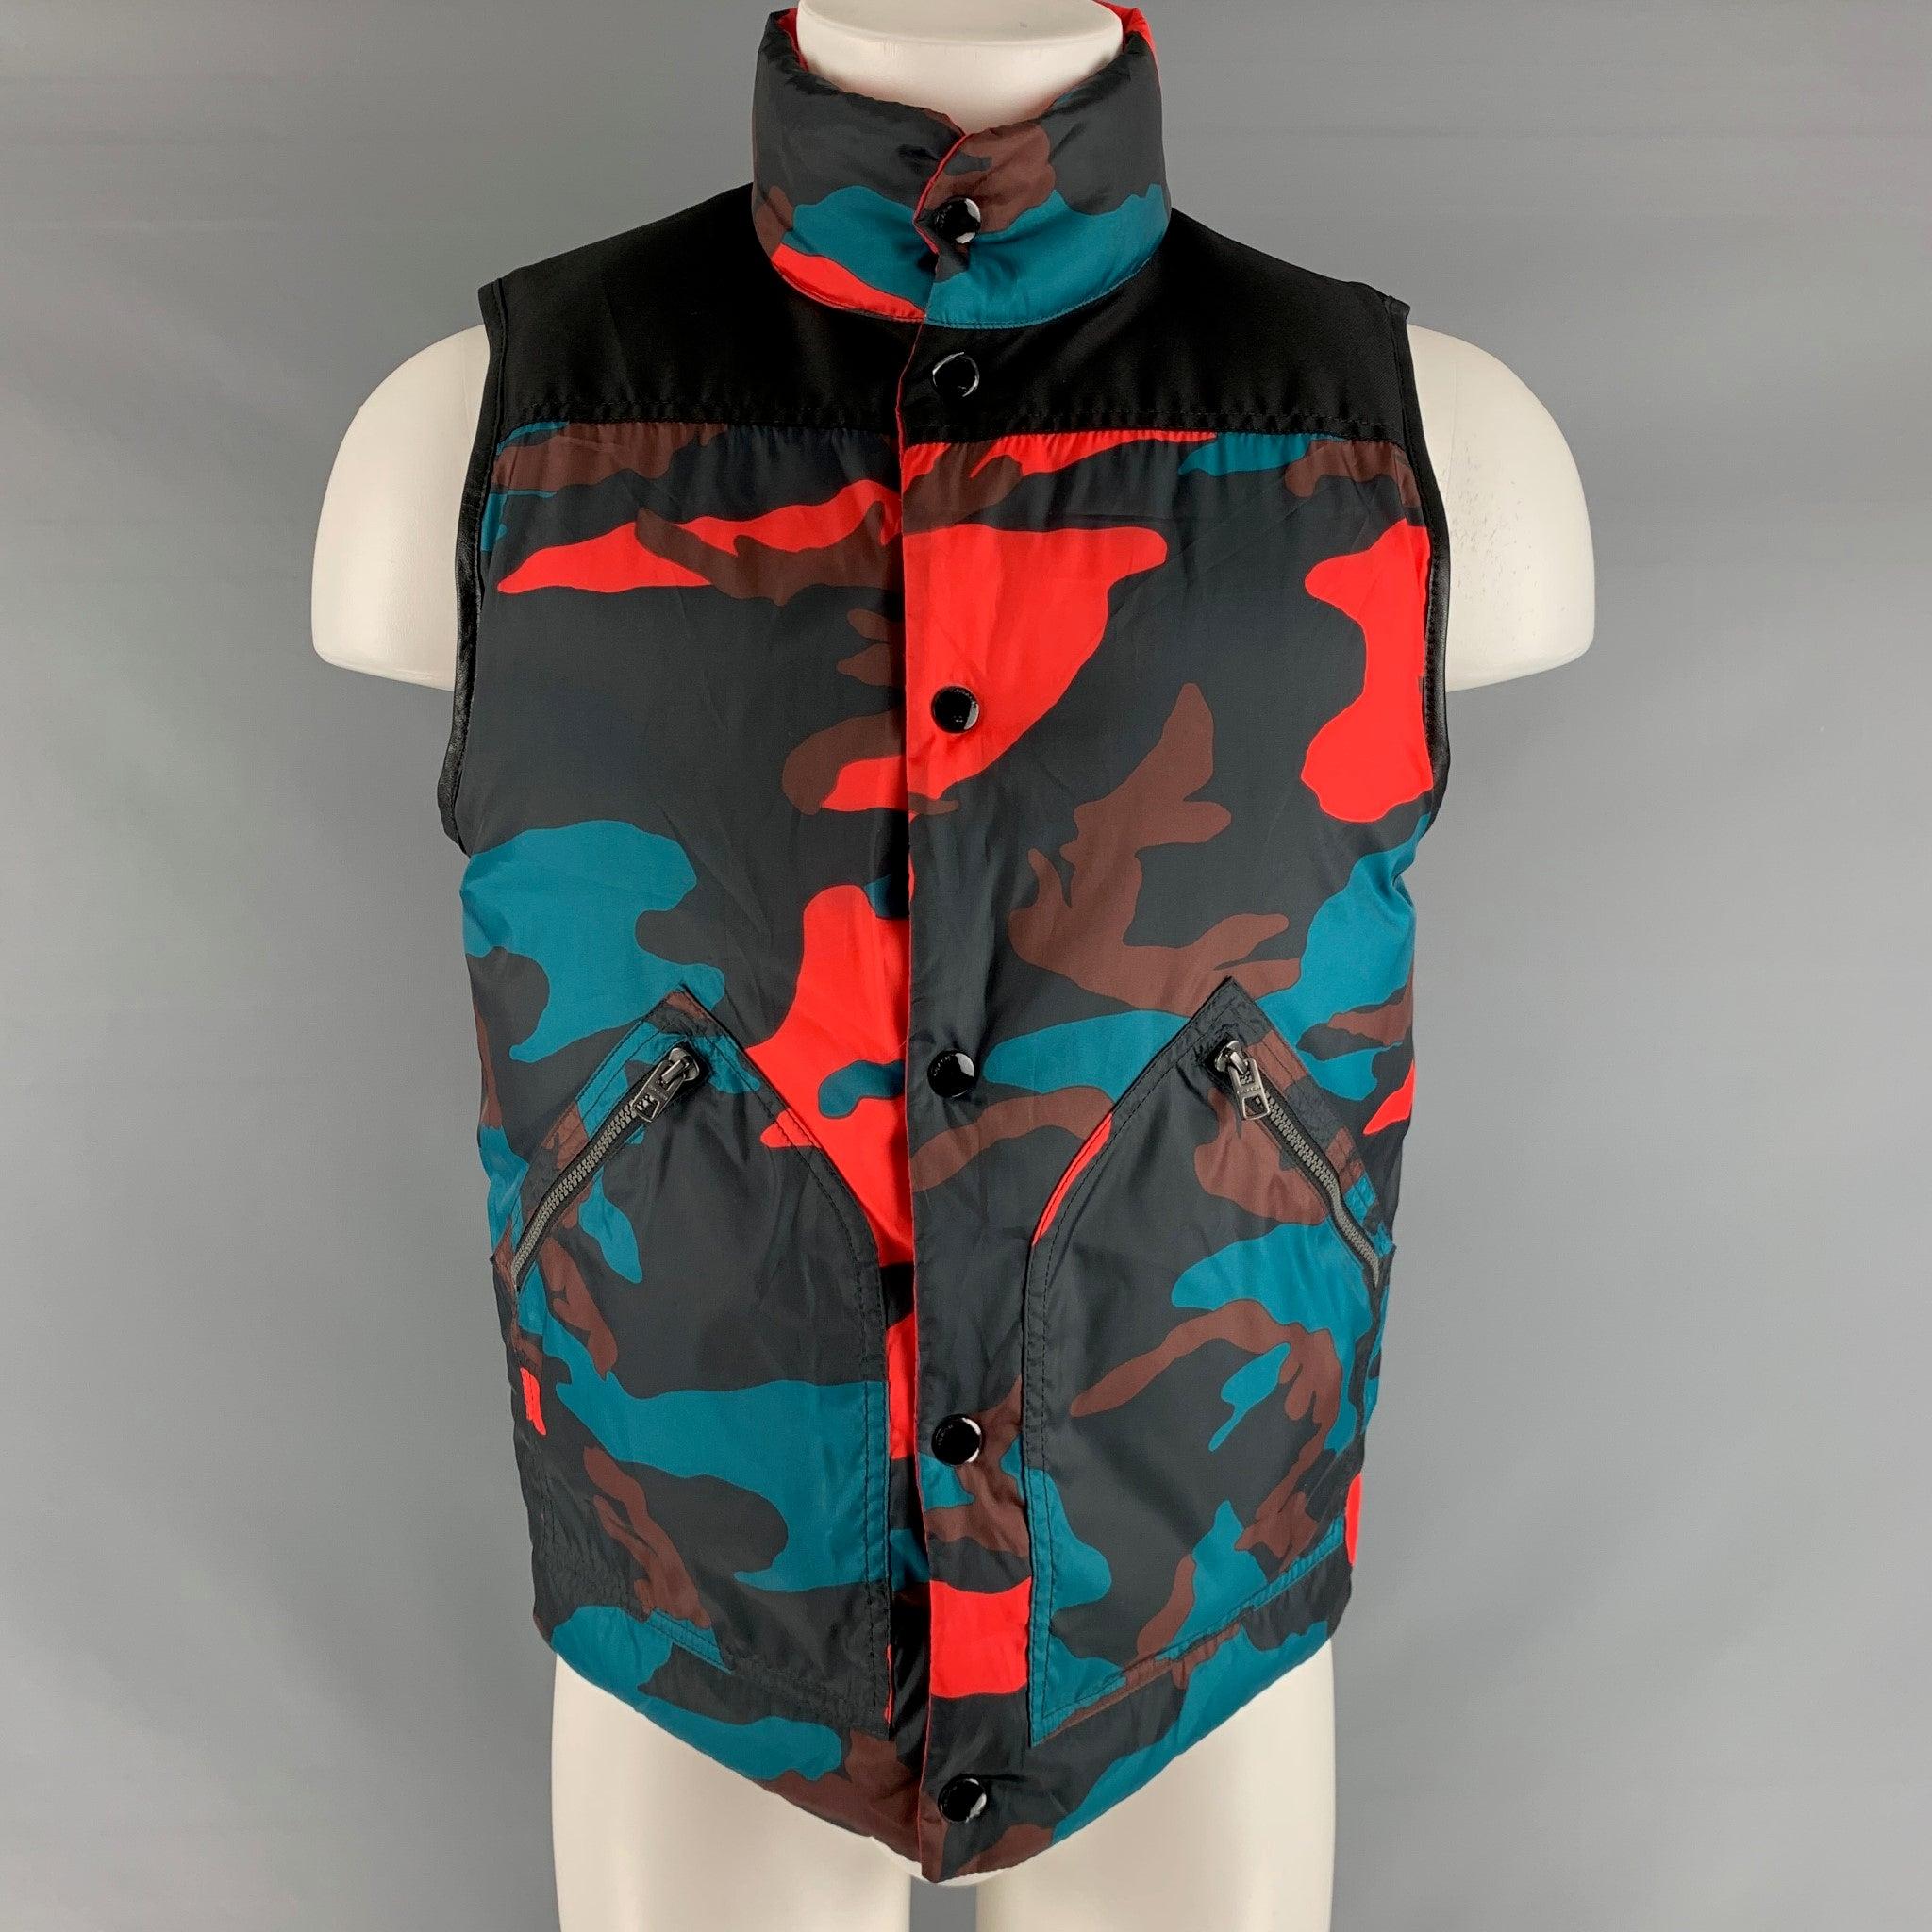 COACH vest comes in a red abd black quilted nylon woven material featuring a high collar, reversible style, sleeveless, front pockets, and a snap button closure. Excellent Pre- Owned Conditions.  

Marked:   S 

Measurements: 
 
Shoulder: 15.5